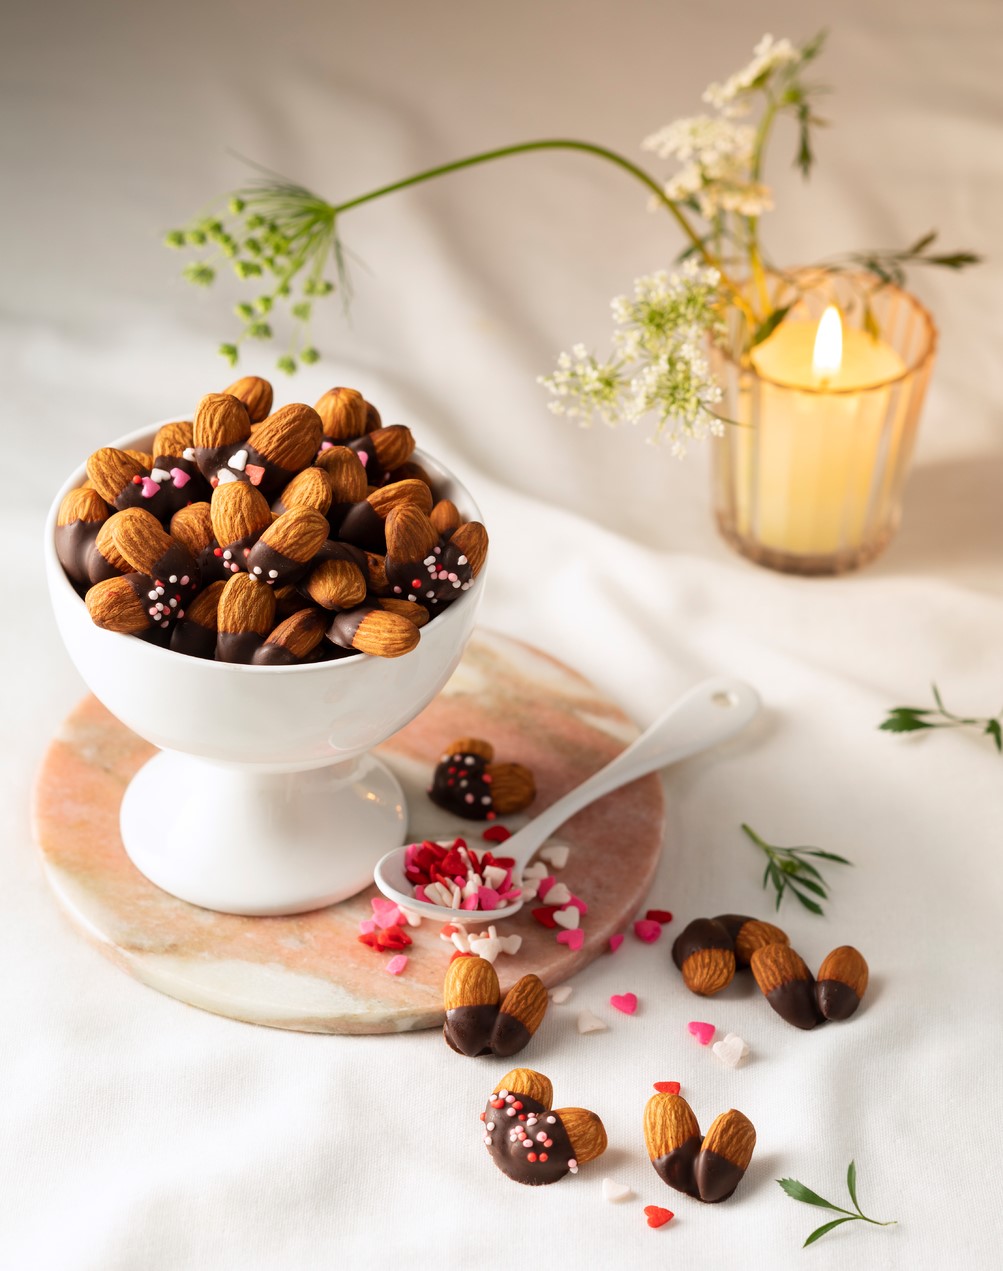 Give the gift of love and health with almonds, this Valentine’s Day